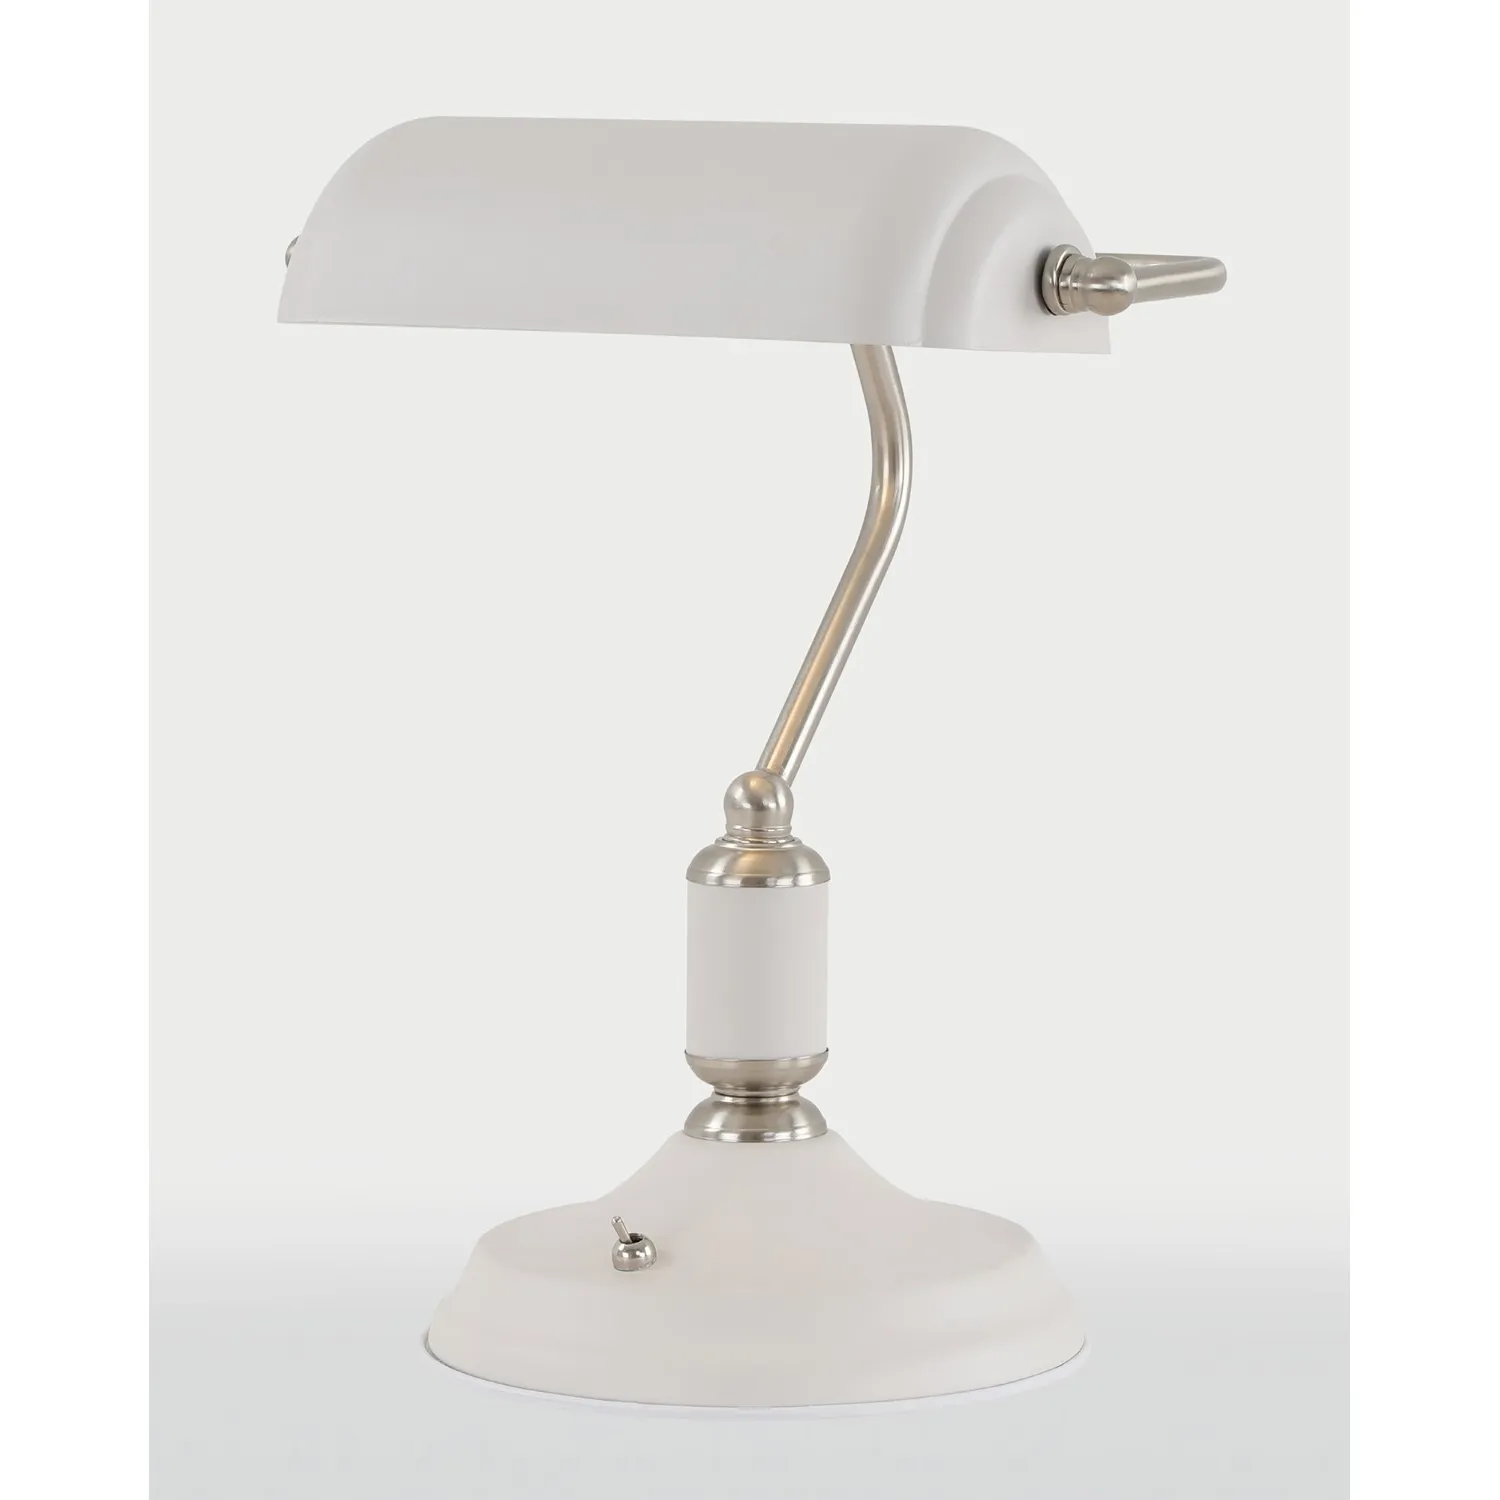 Brent Table Lamp 1 Light With Toggle Switch, Satin Nickel Sand White